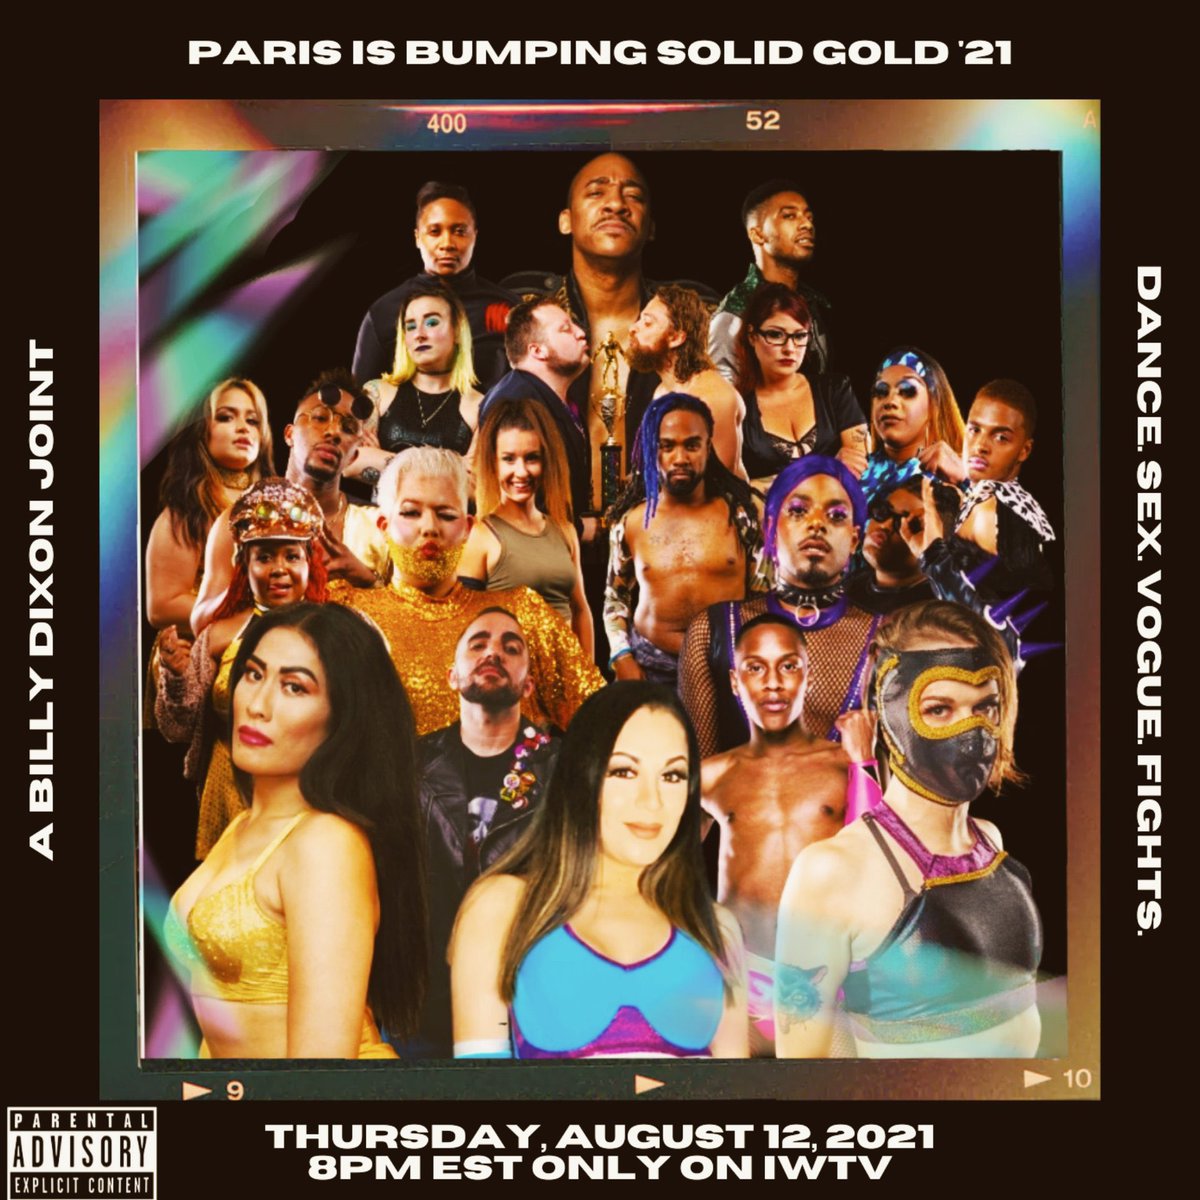 Relive the magic that was Paris is Bumping. Now streaming on @indiewrestling.